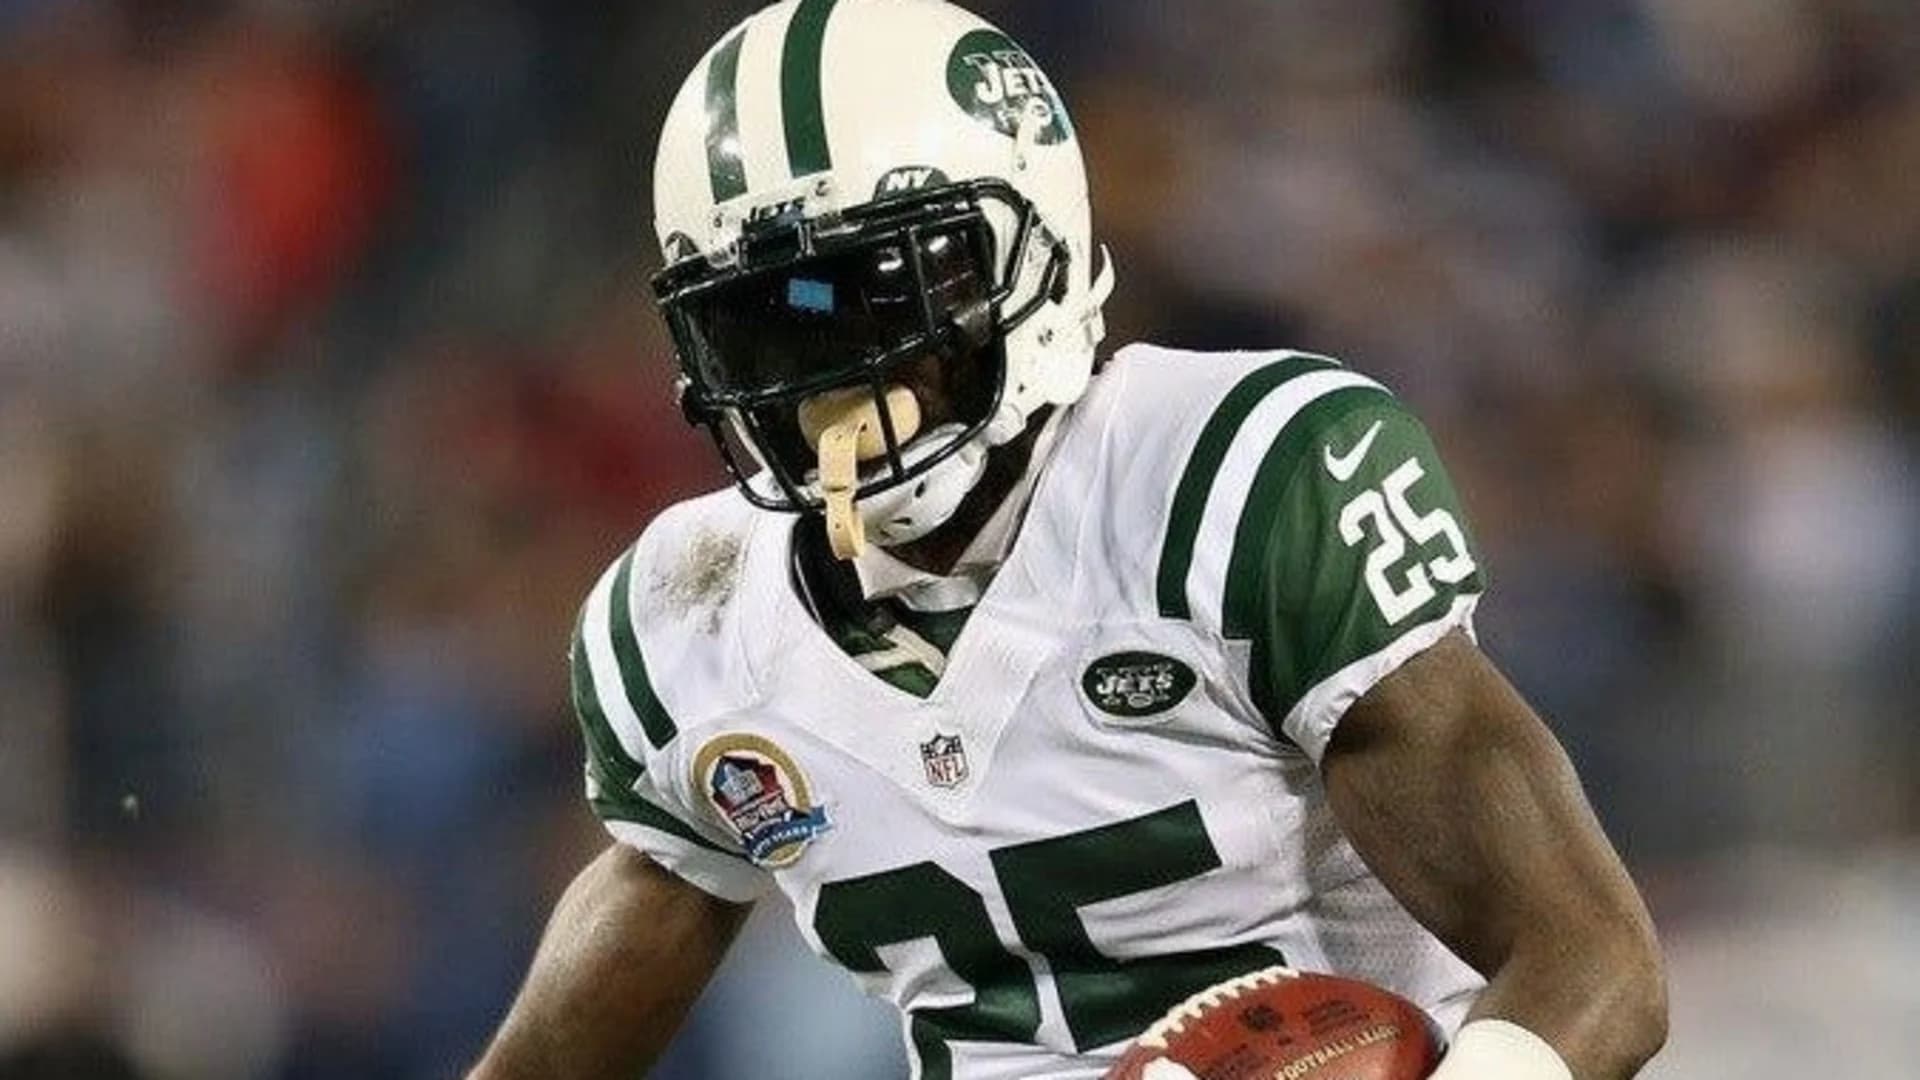 Louisiana jury: Man guilty of manslaughter in death of ex-Jets player